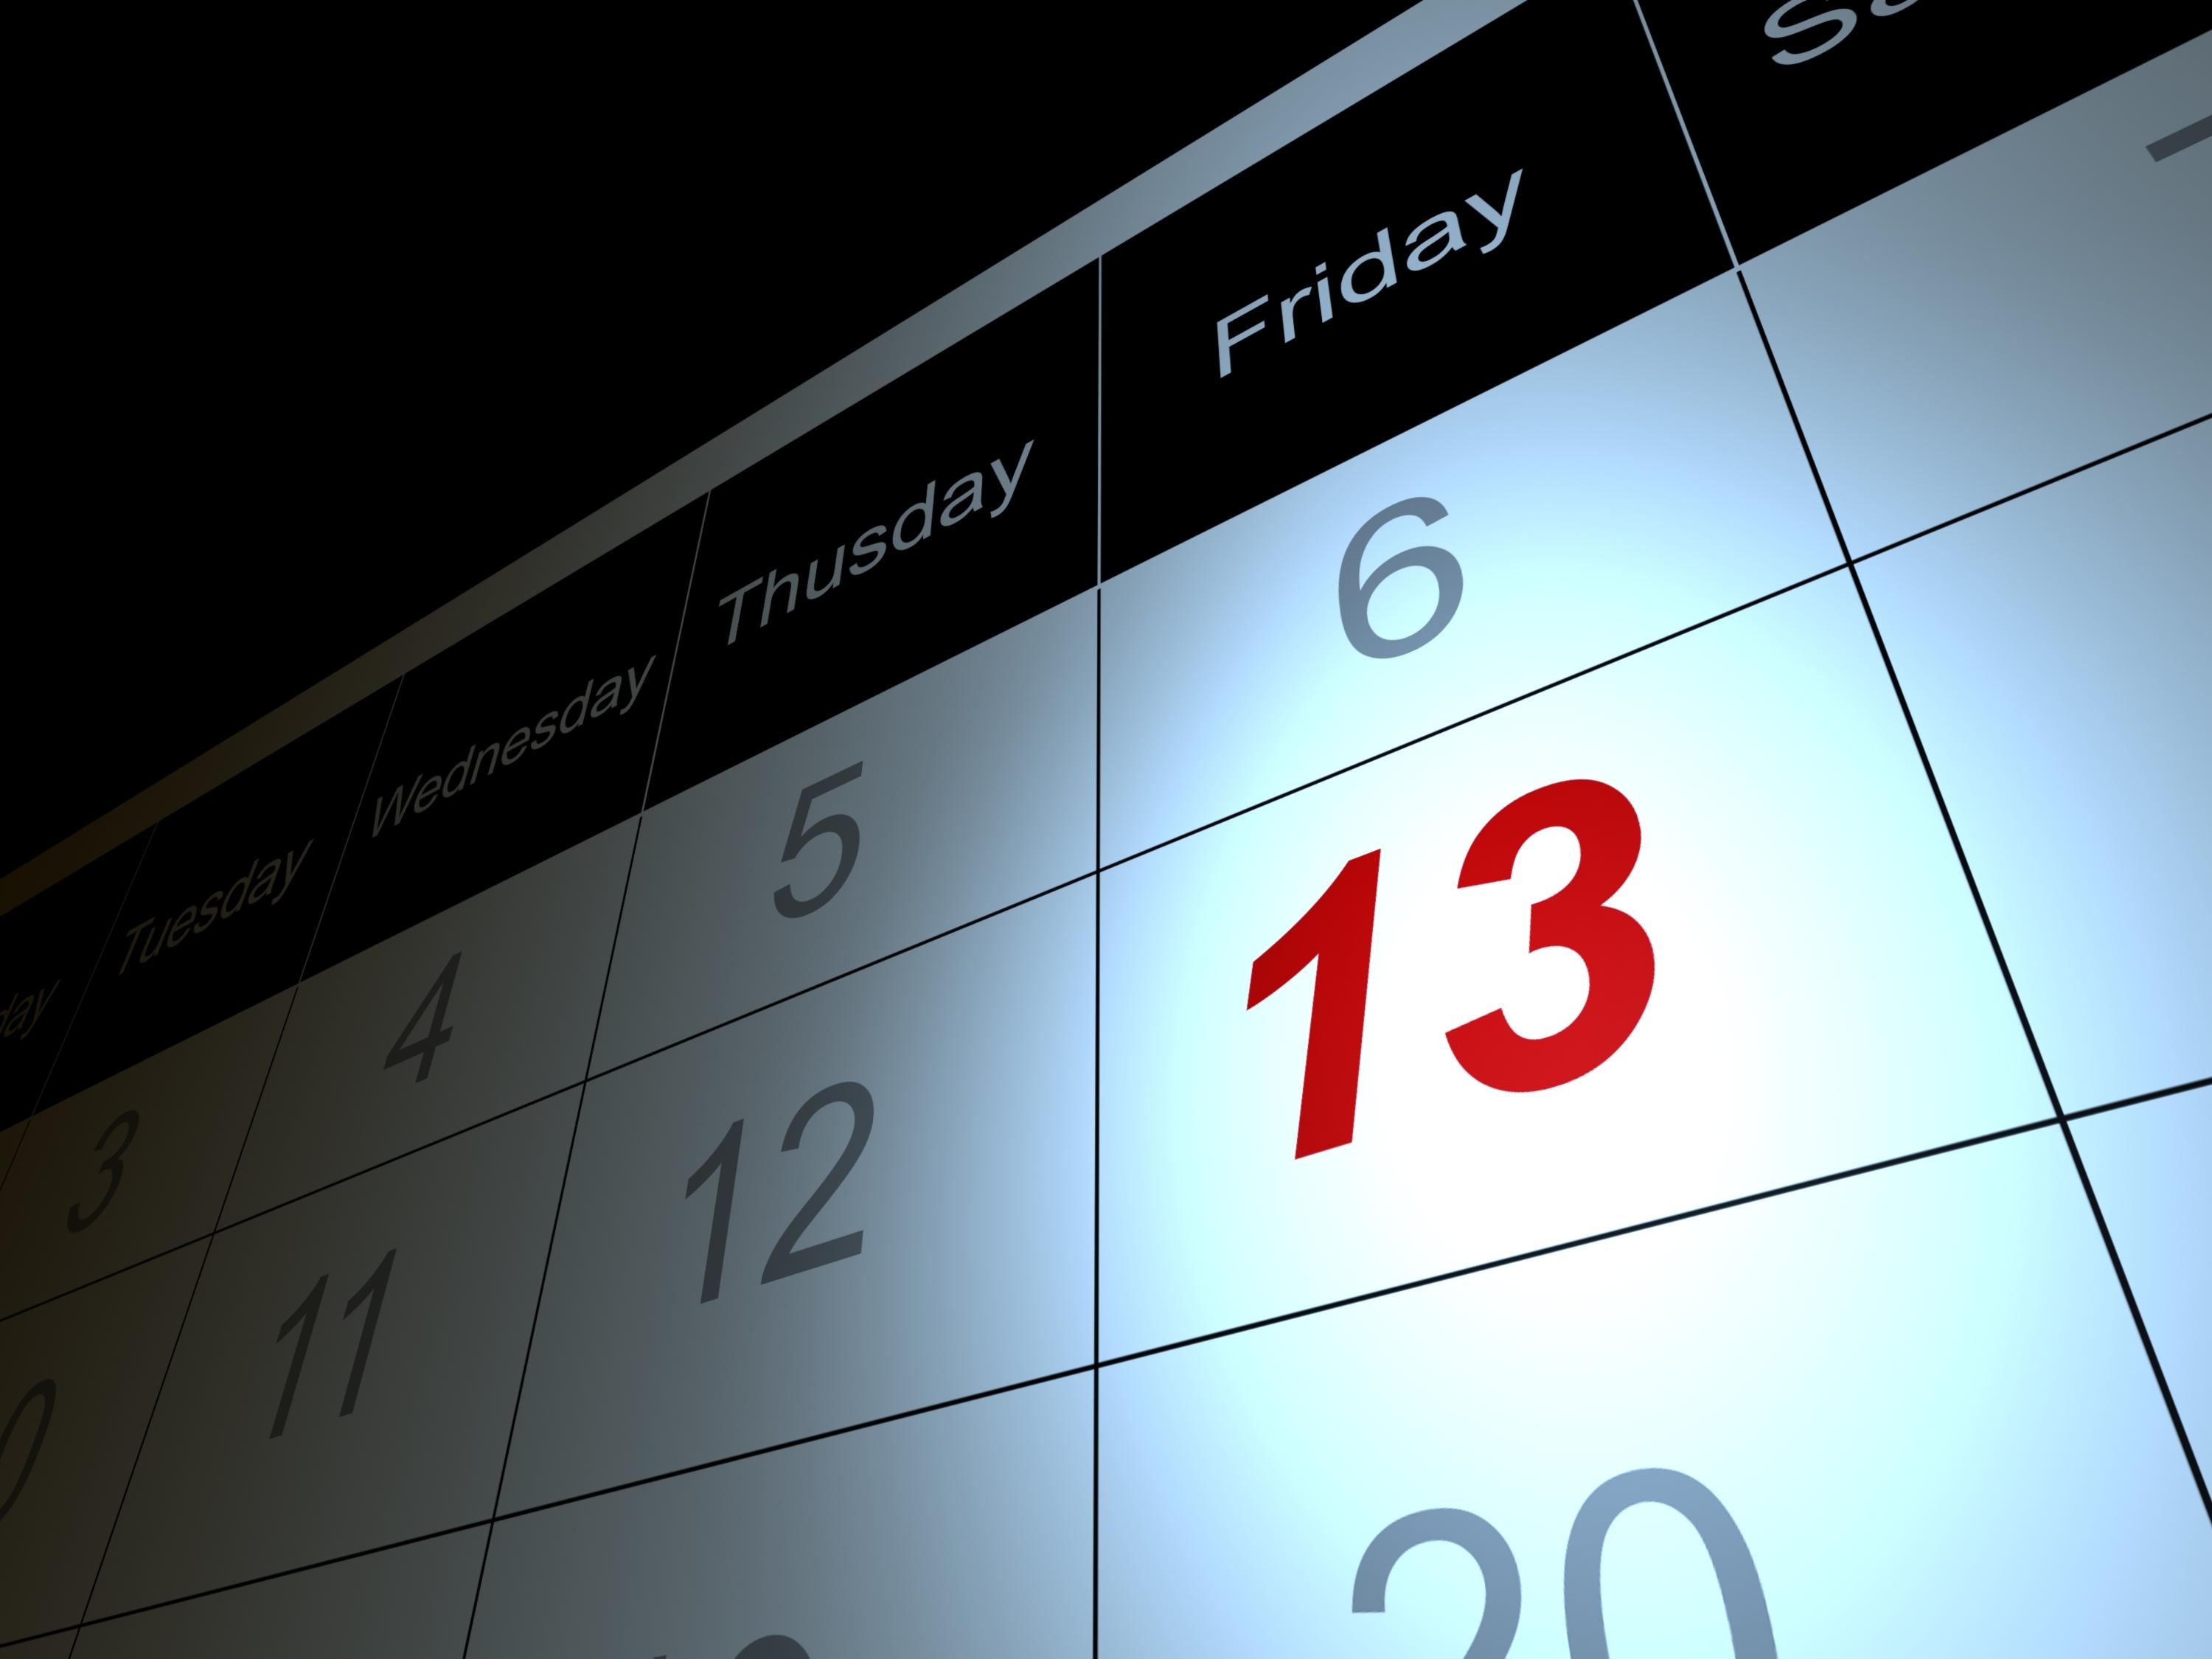 Friday the 13th: We explain why once or twice a year we have an unlucky day